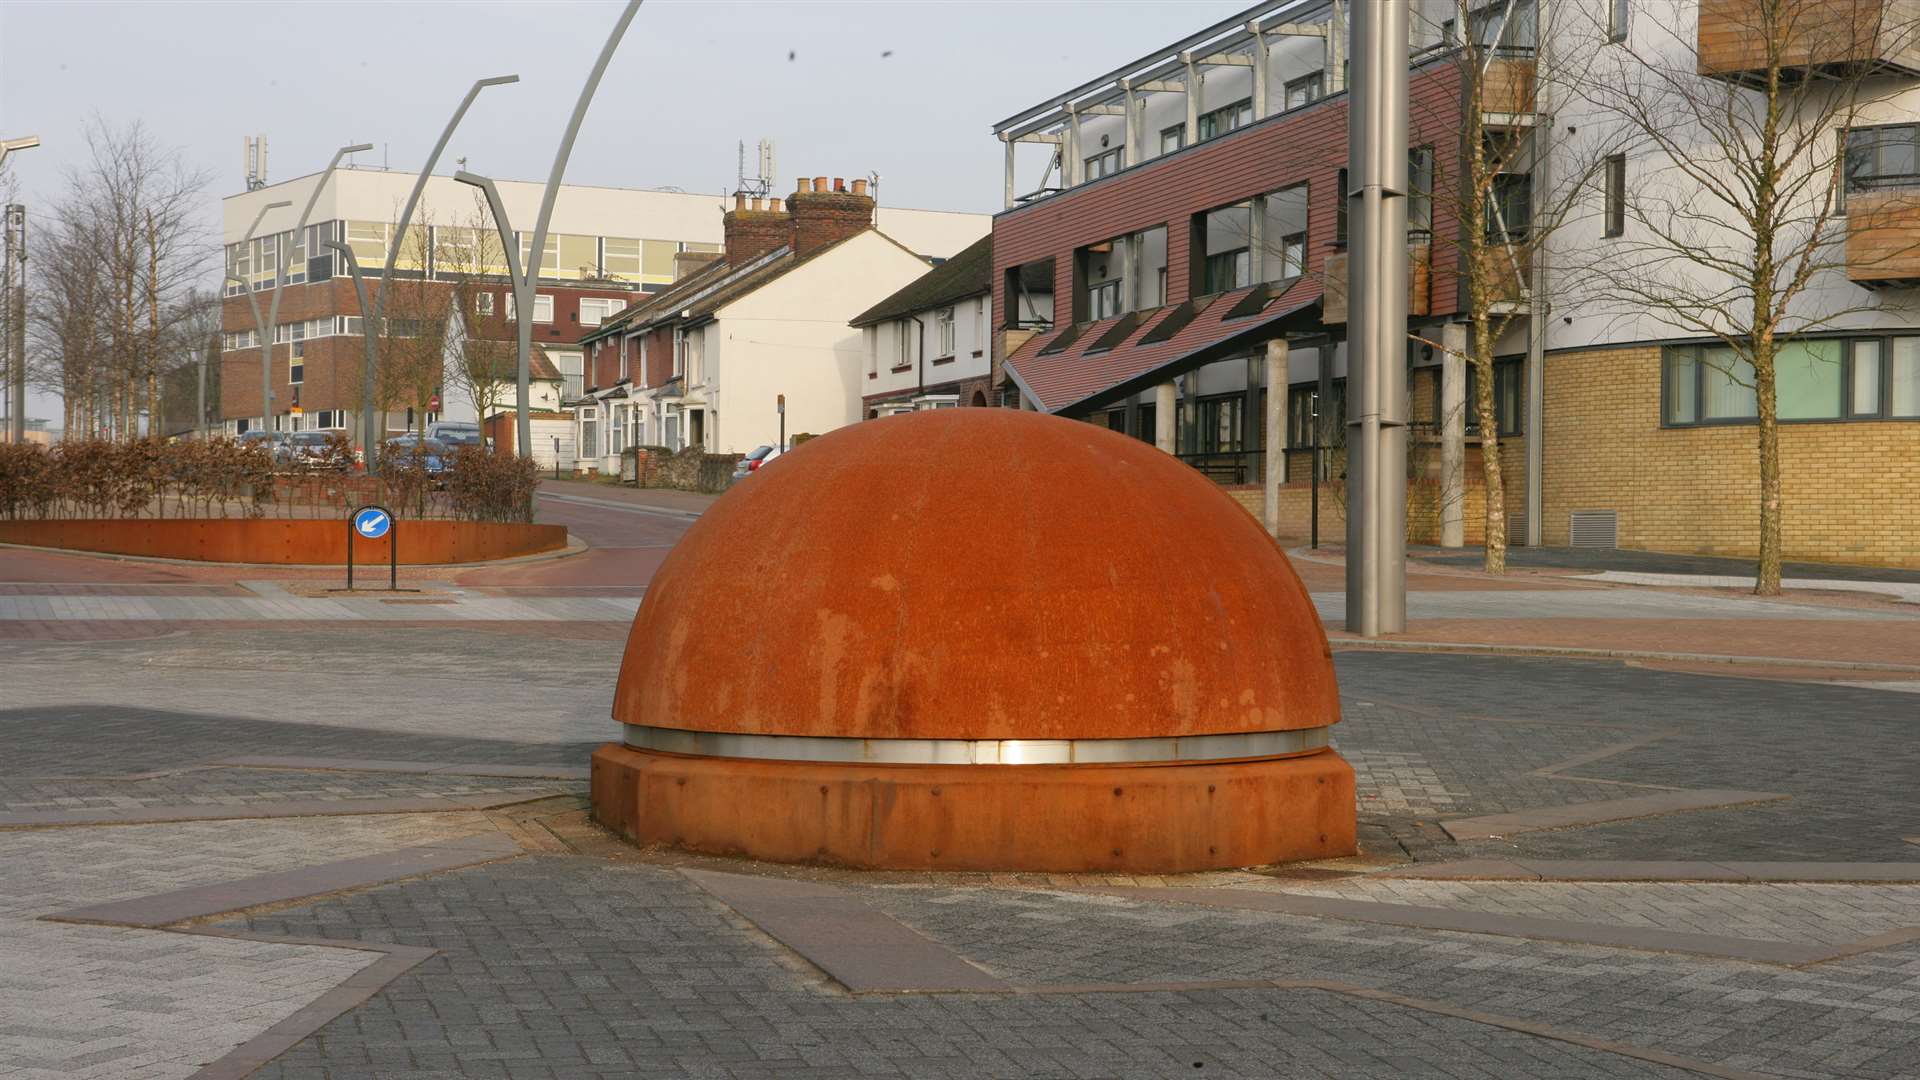 The Bolt roundabout